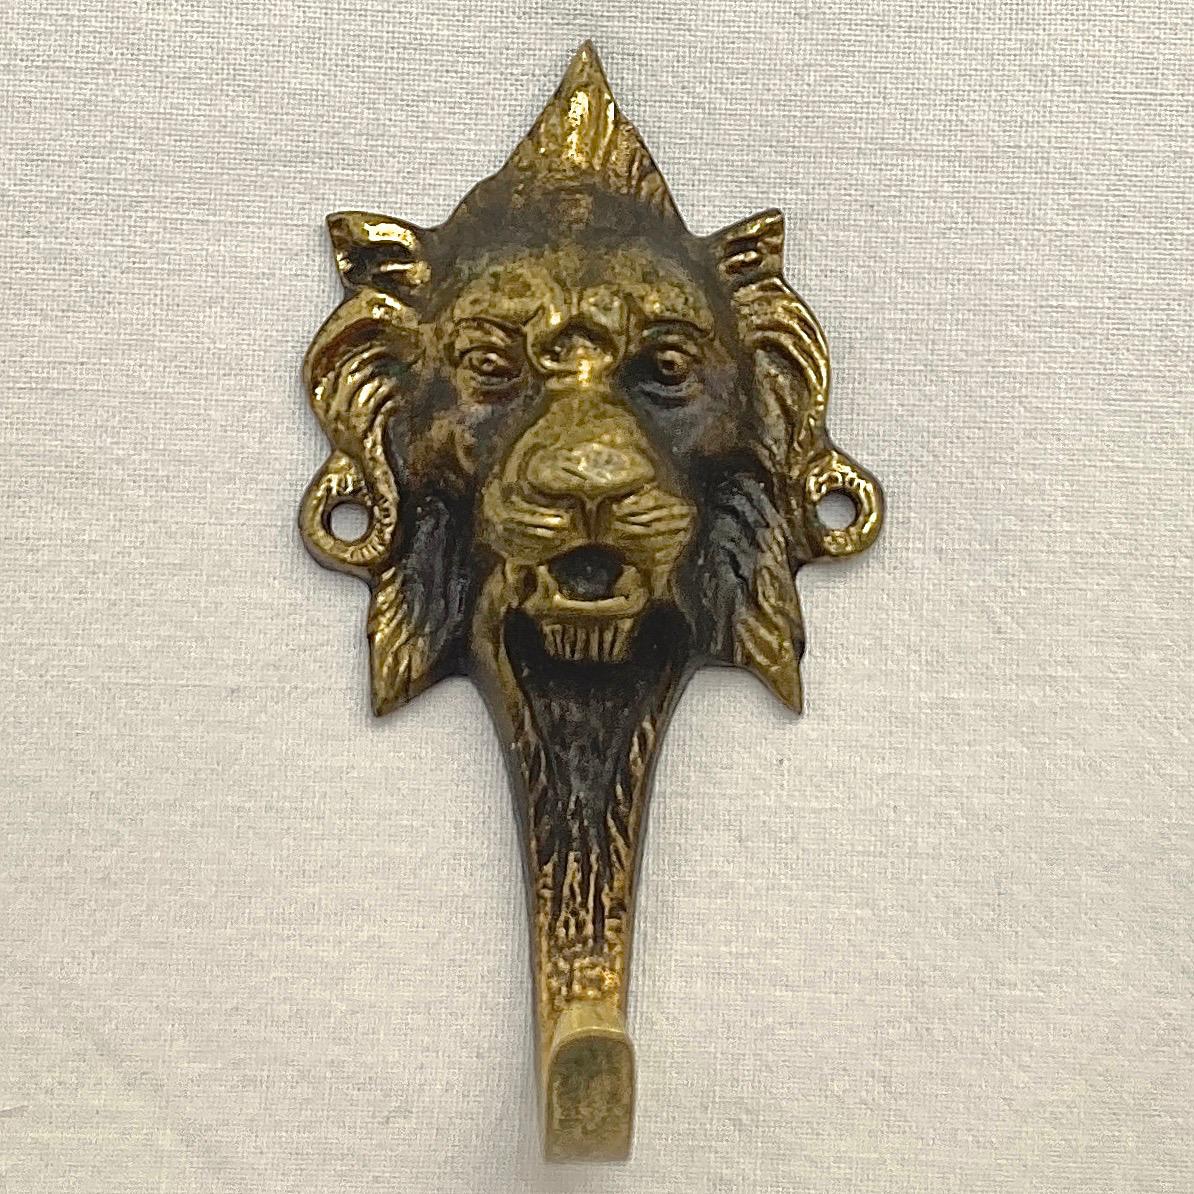 Pair of French brass single hooks with a detailed lion head design, the hooks have a lovely black patina finish. They have two holes on each lion for wall mounting. Measuring length 8cm / 3.1 inches by maximum width 4.3cm / 1.7 inches. There is wear